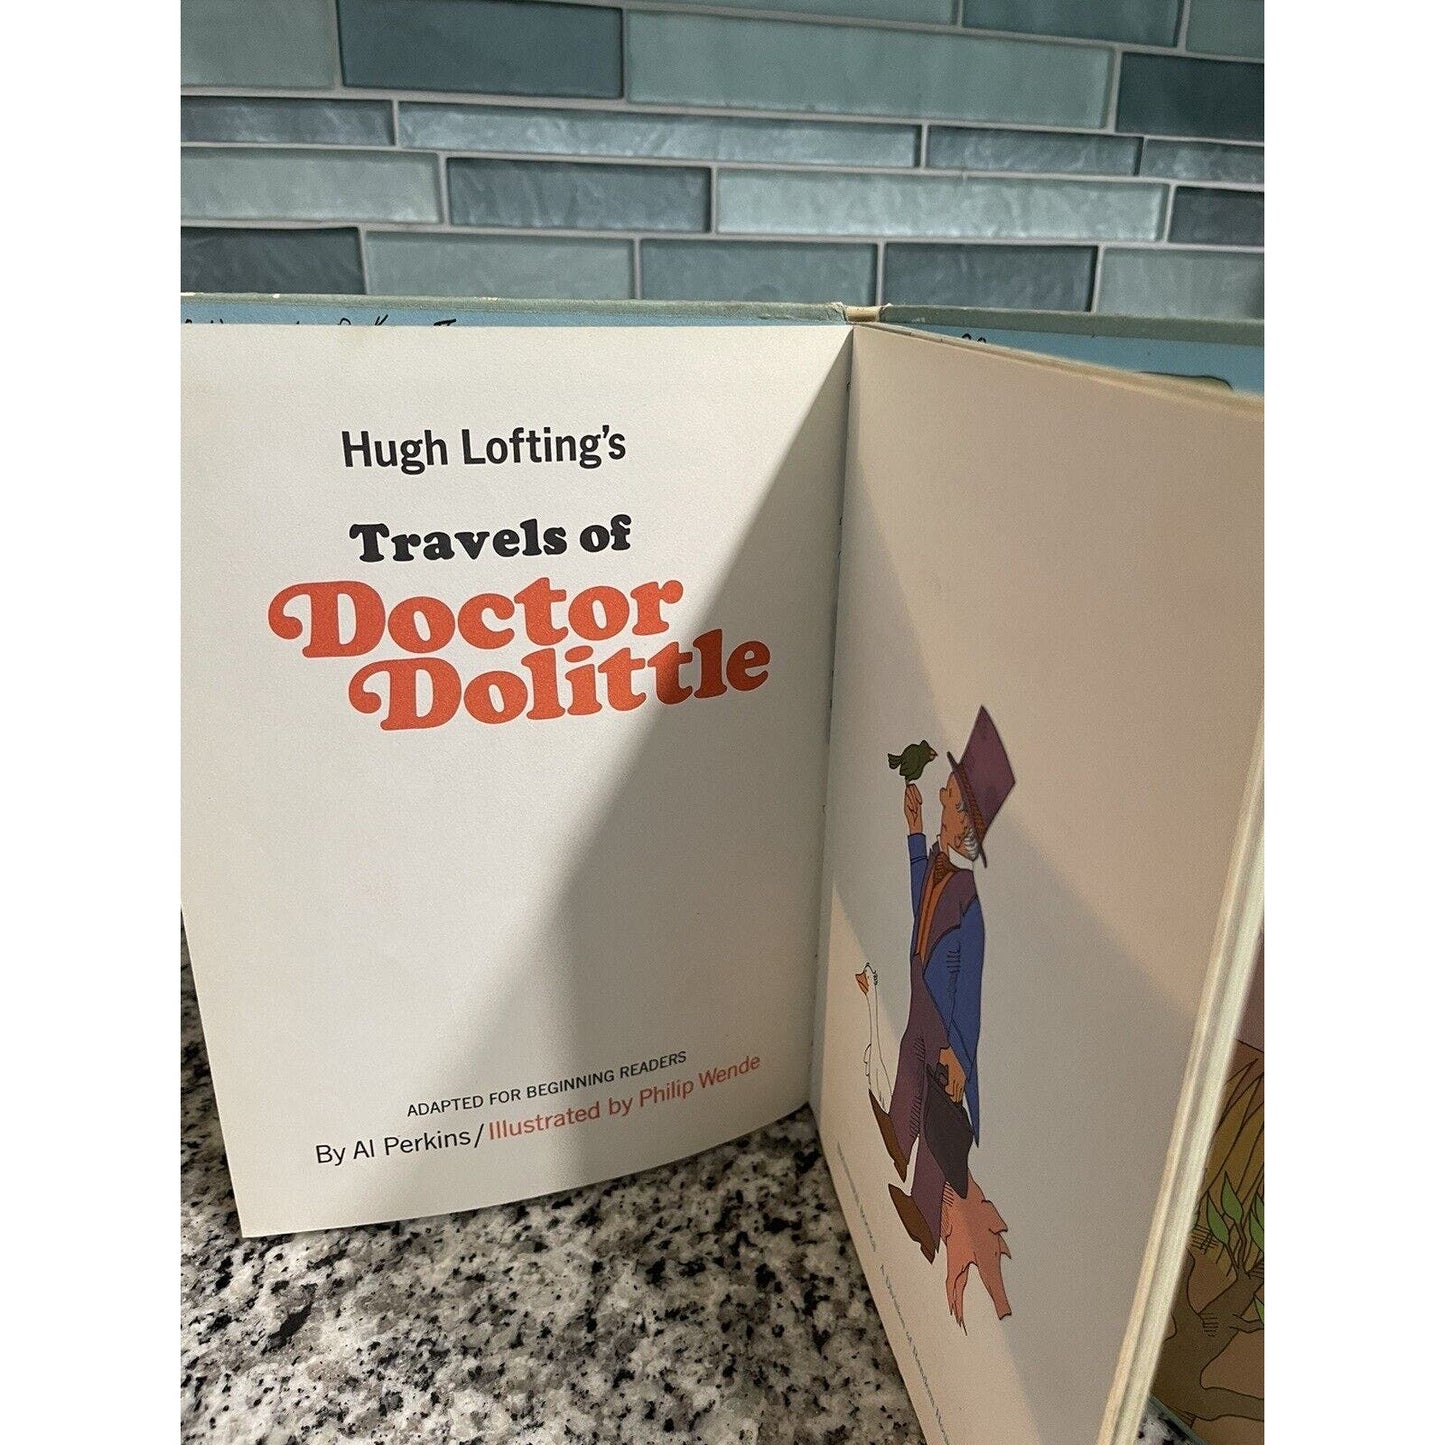 1967 Vintage Book Club Ed "Travel's Of Dr. Dolittle" by Philip Wende - Dr. Seuss